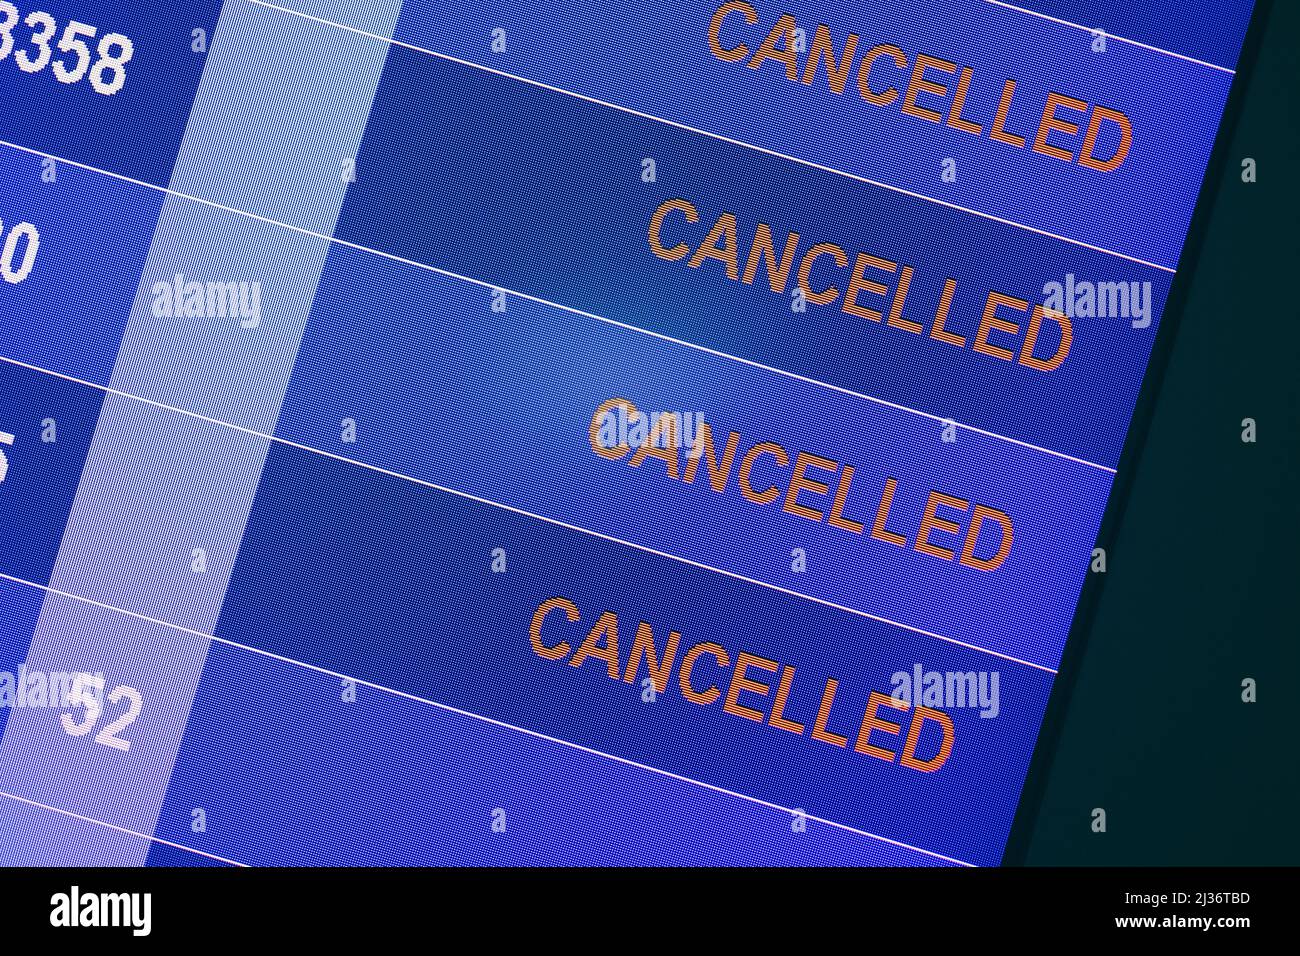 Airpot flight boarding schedule show cancel stop flying travel problem display. Stock Photo